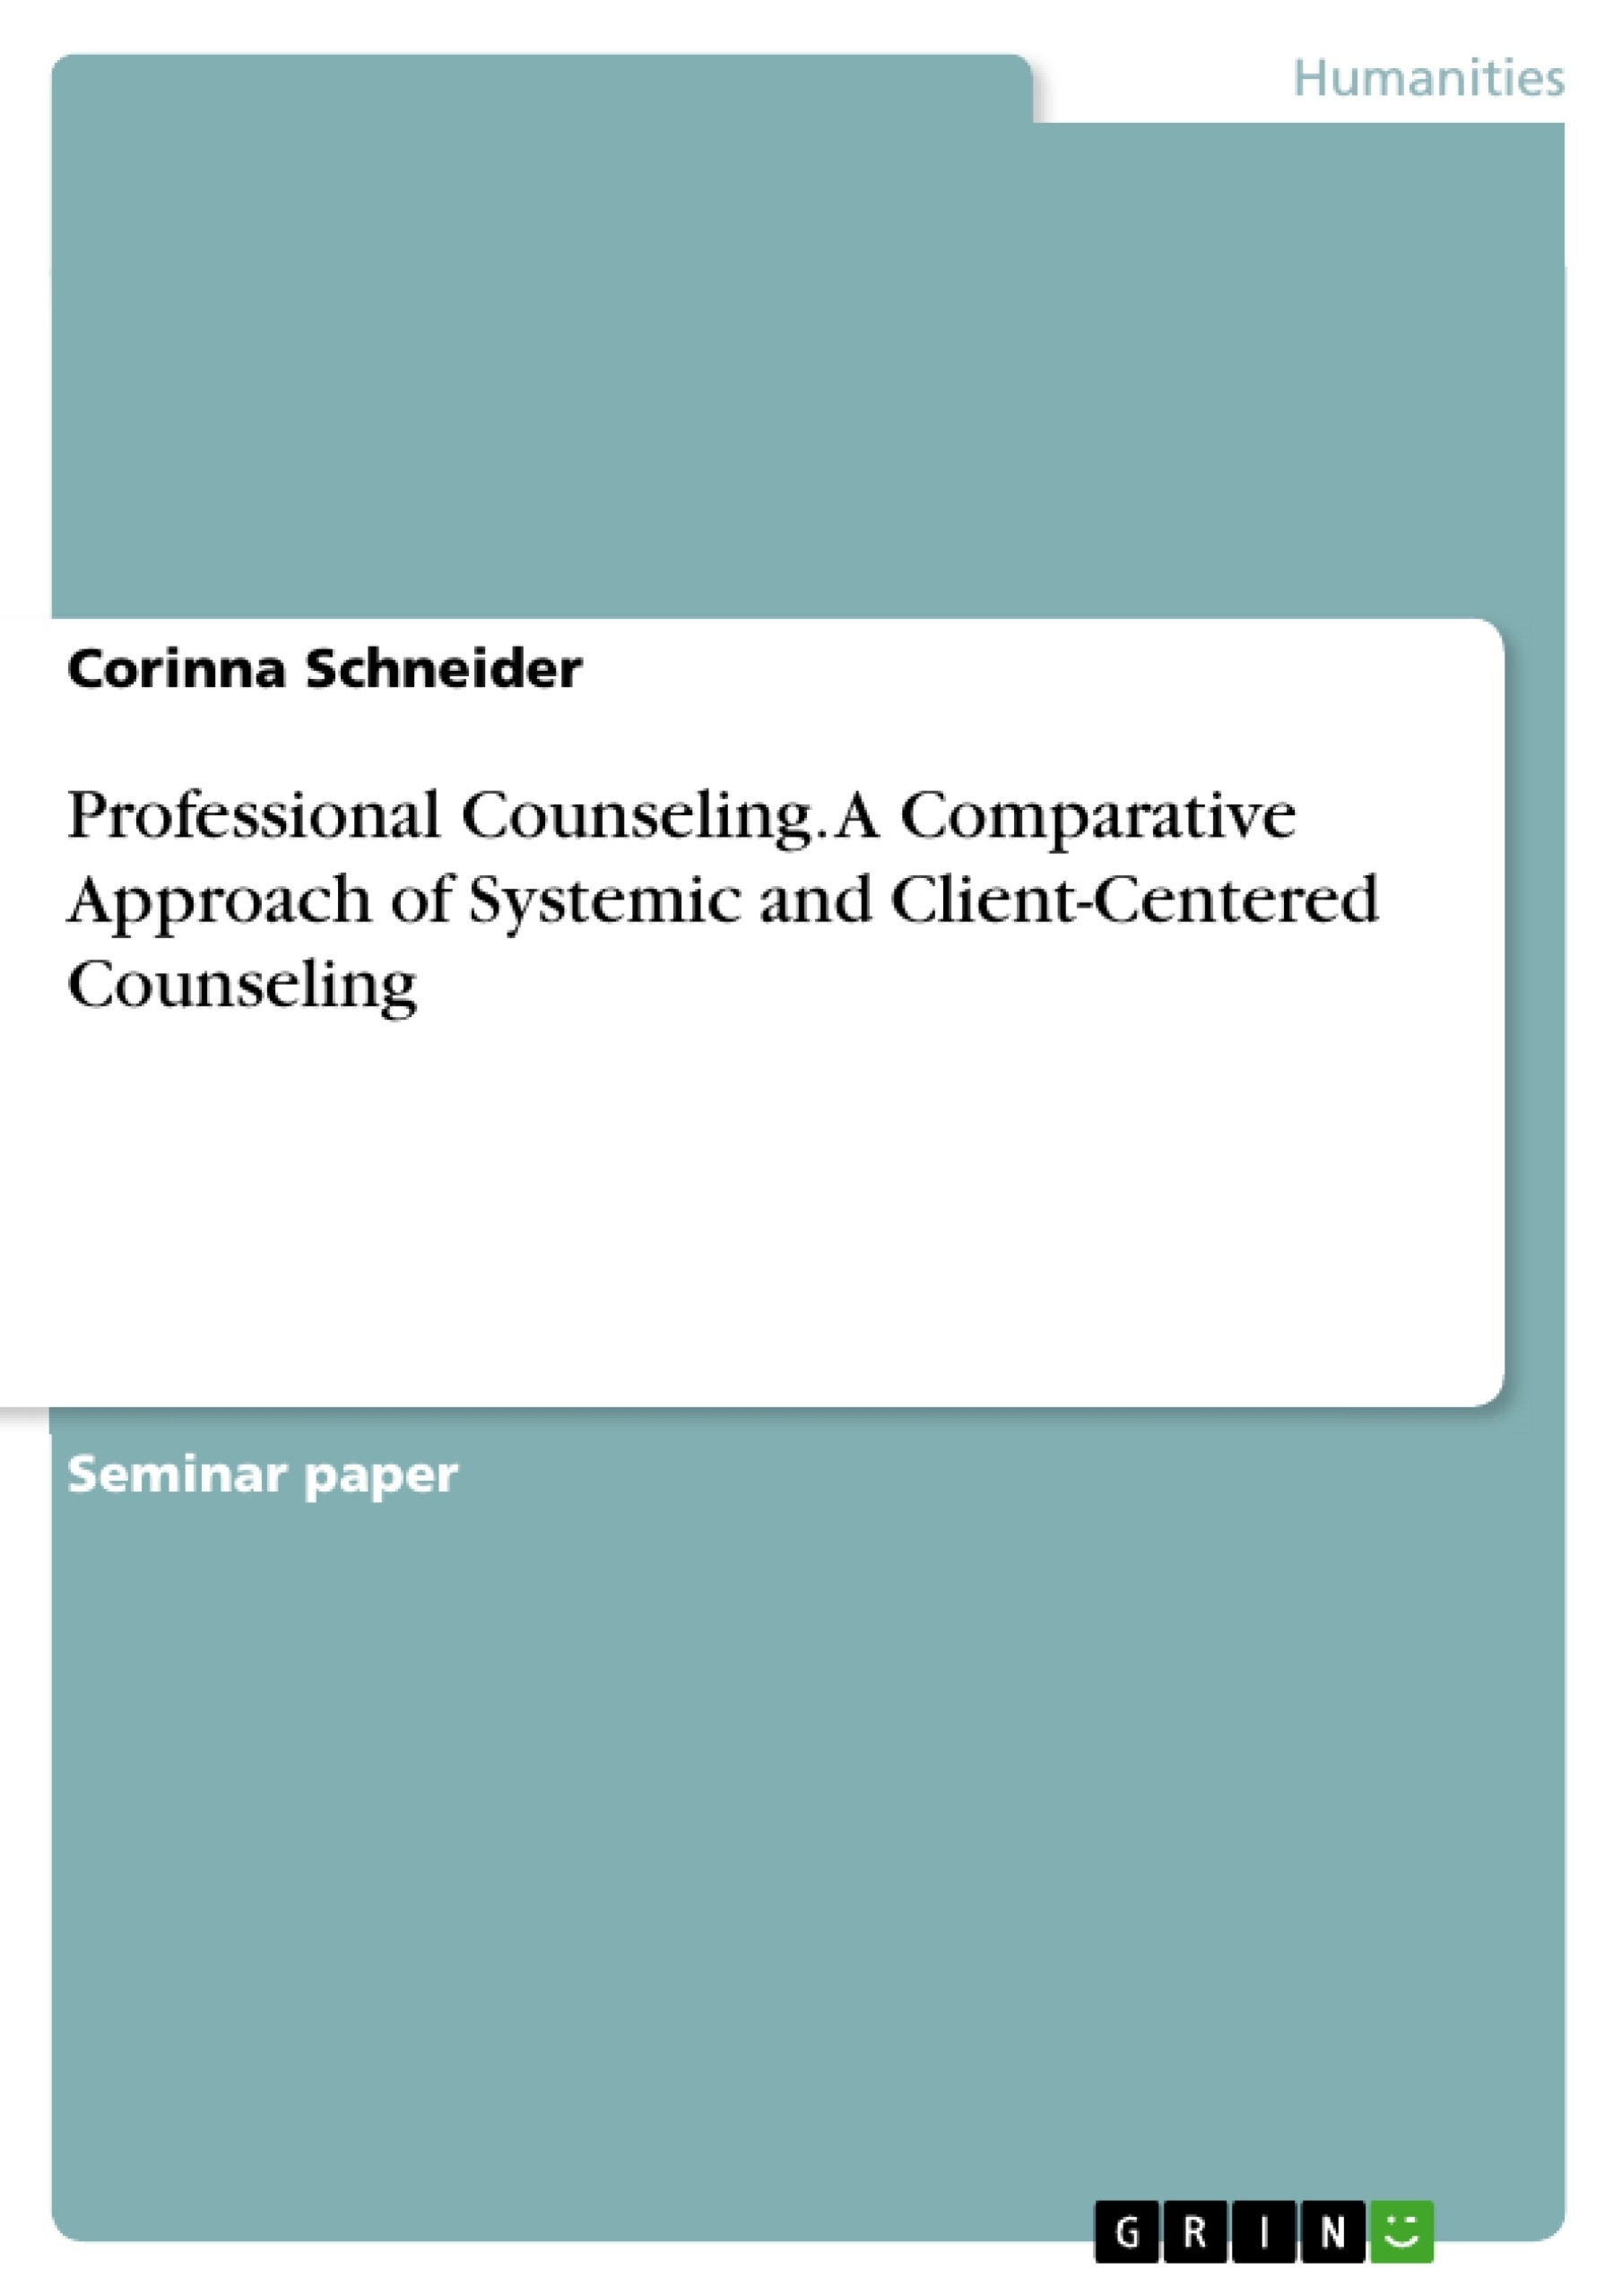 Title: Professional Counseling. A Comparative Approach of Systemic and Client-Centered Counseling